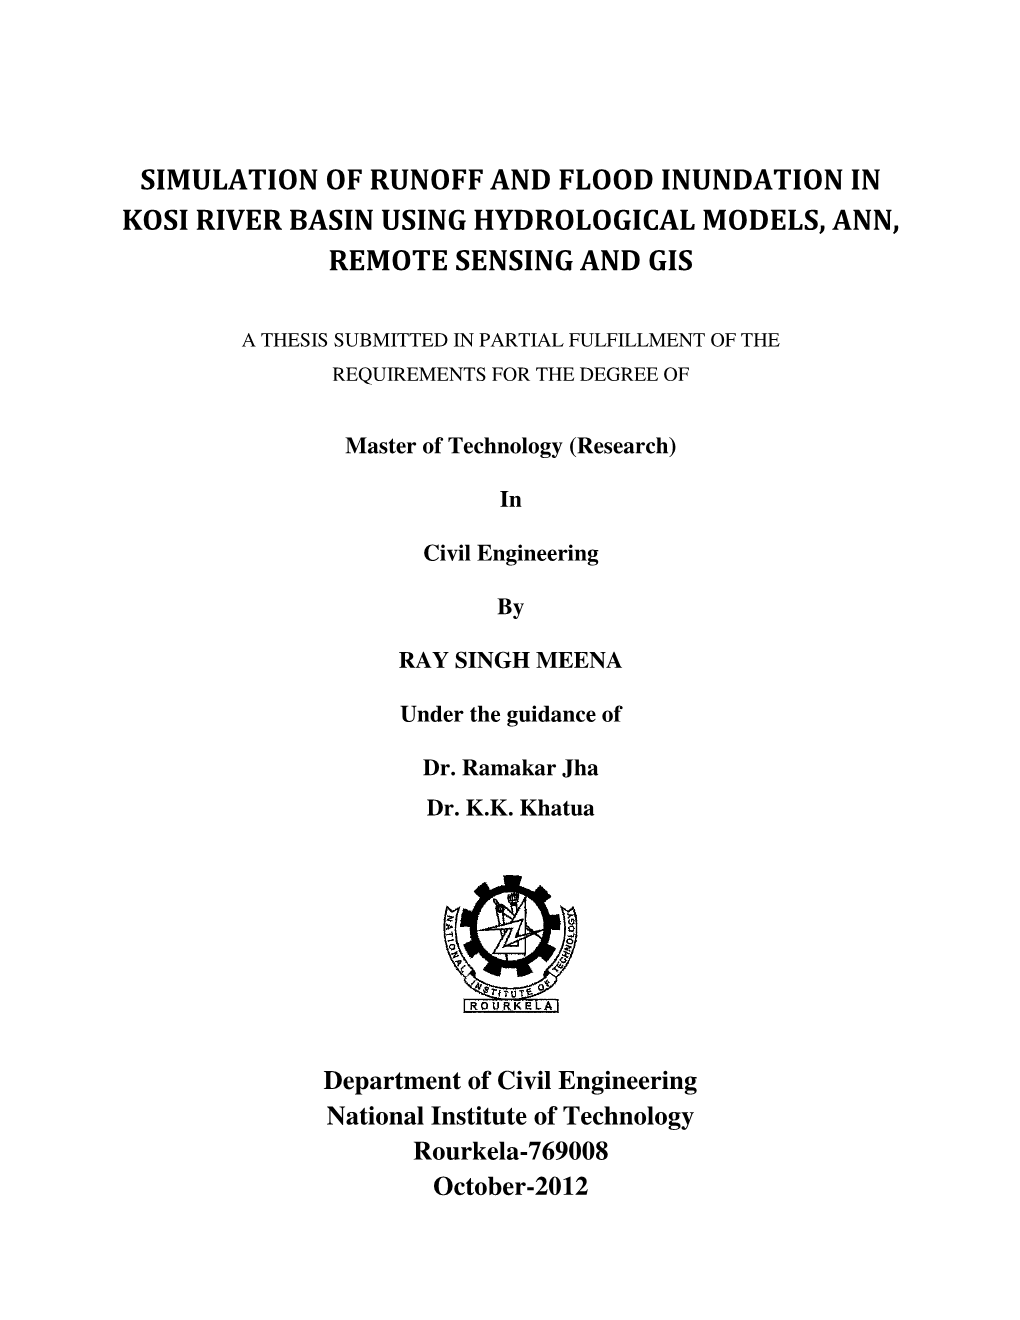 Simulation of Runoff and Flood Inundation in Kosi River Basin Using Hydrological Models, Ann, Remote Sensing and Gis